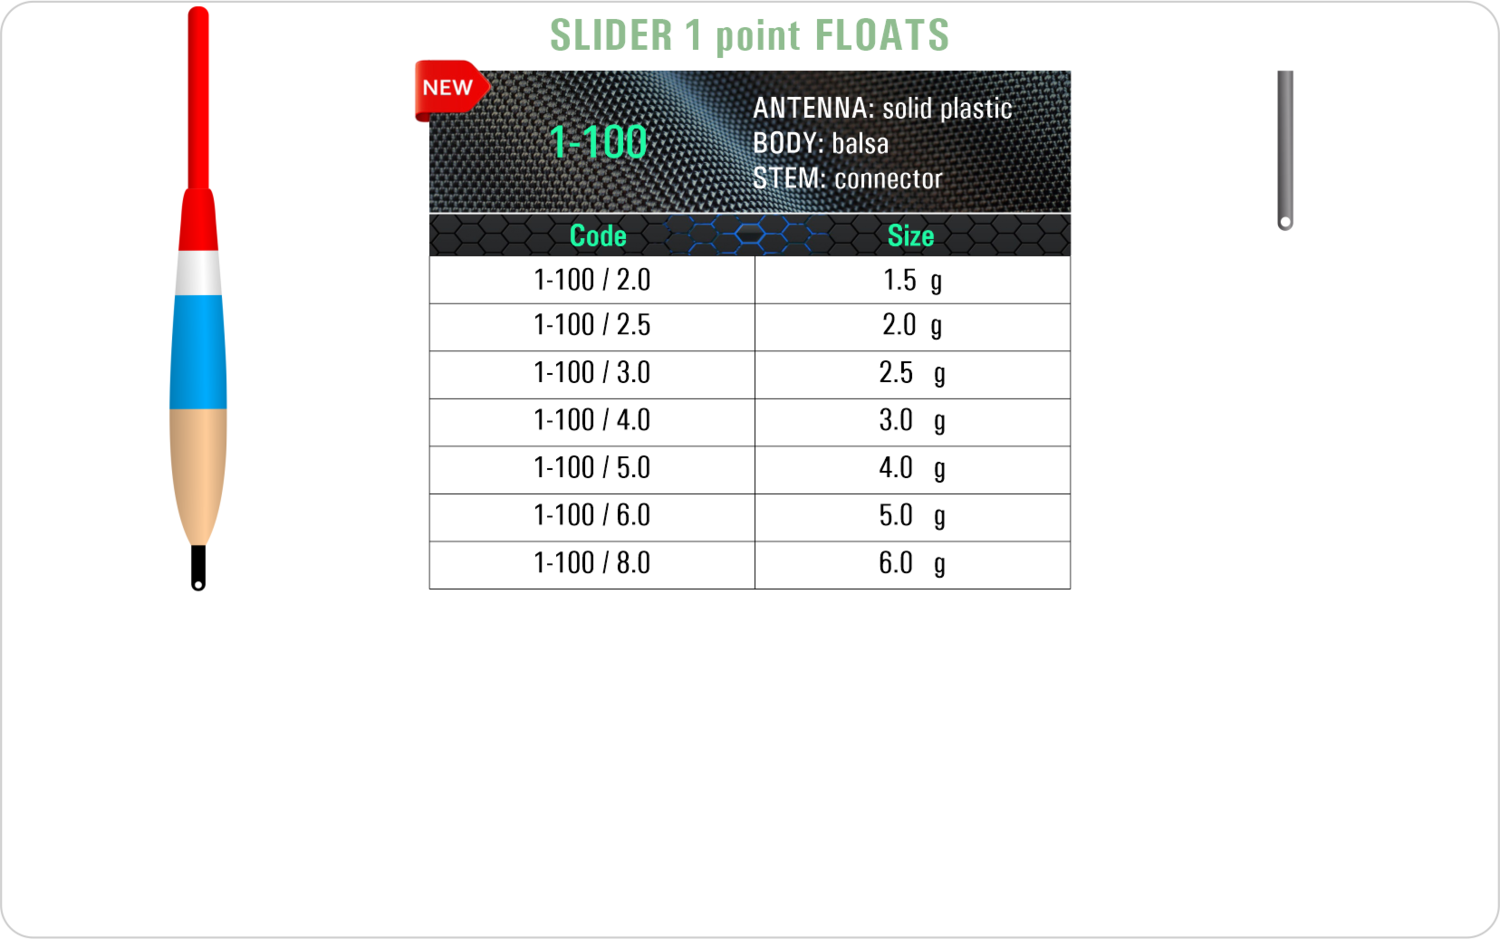 SF 1-100 - Lake and river float model and table containing an additional information about this float with different codes, sizes, types of the body, the stem and the antenna of the float.